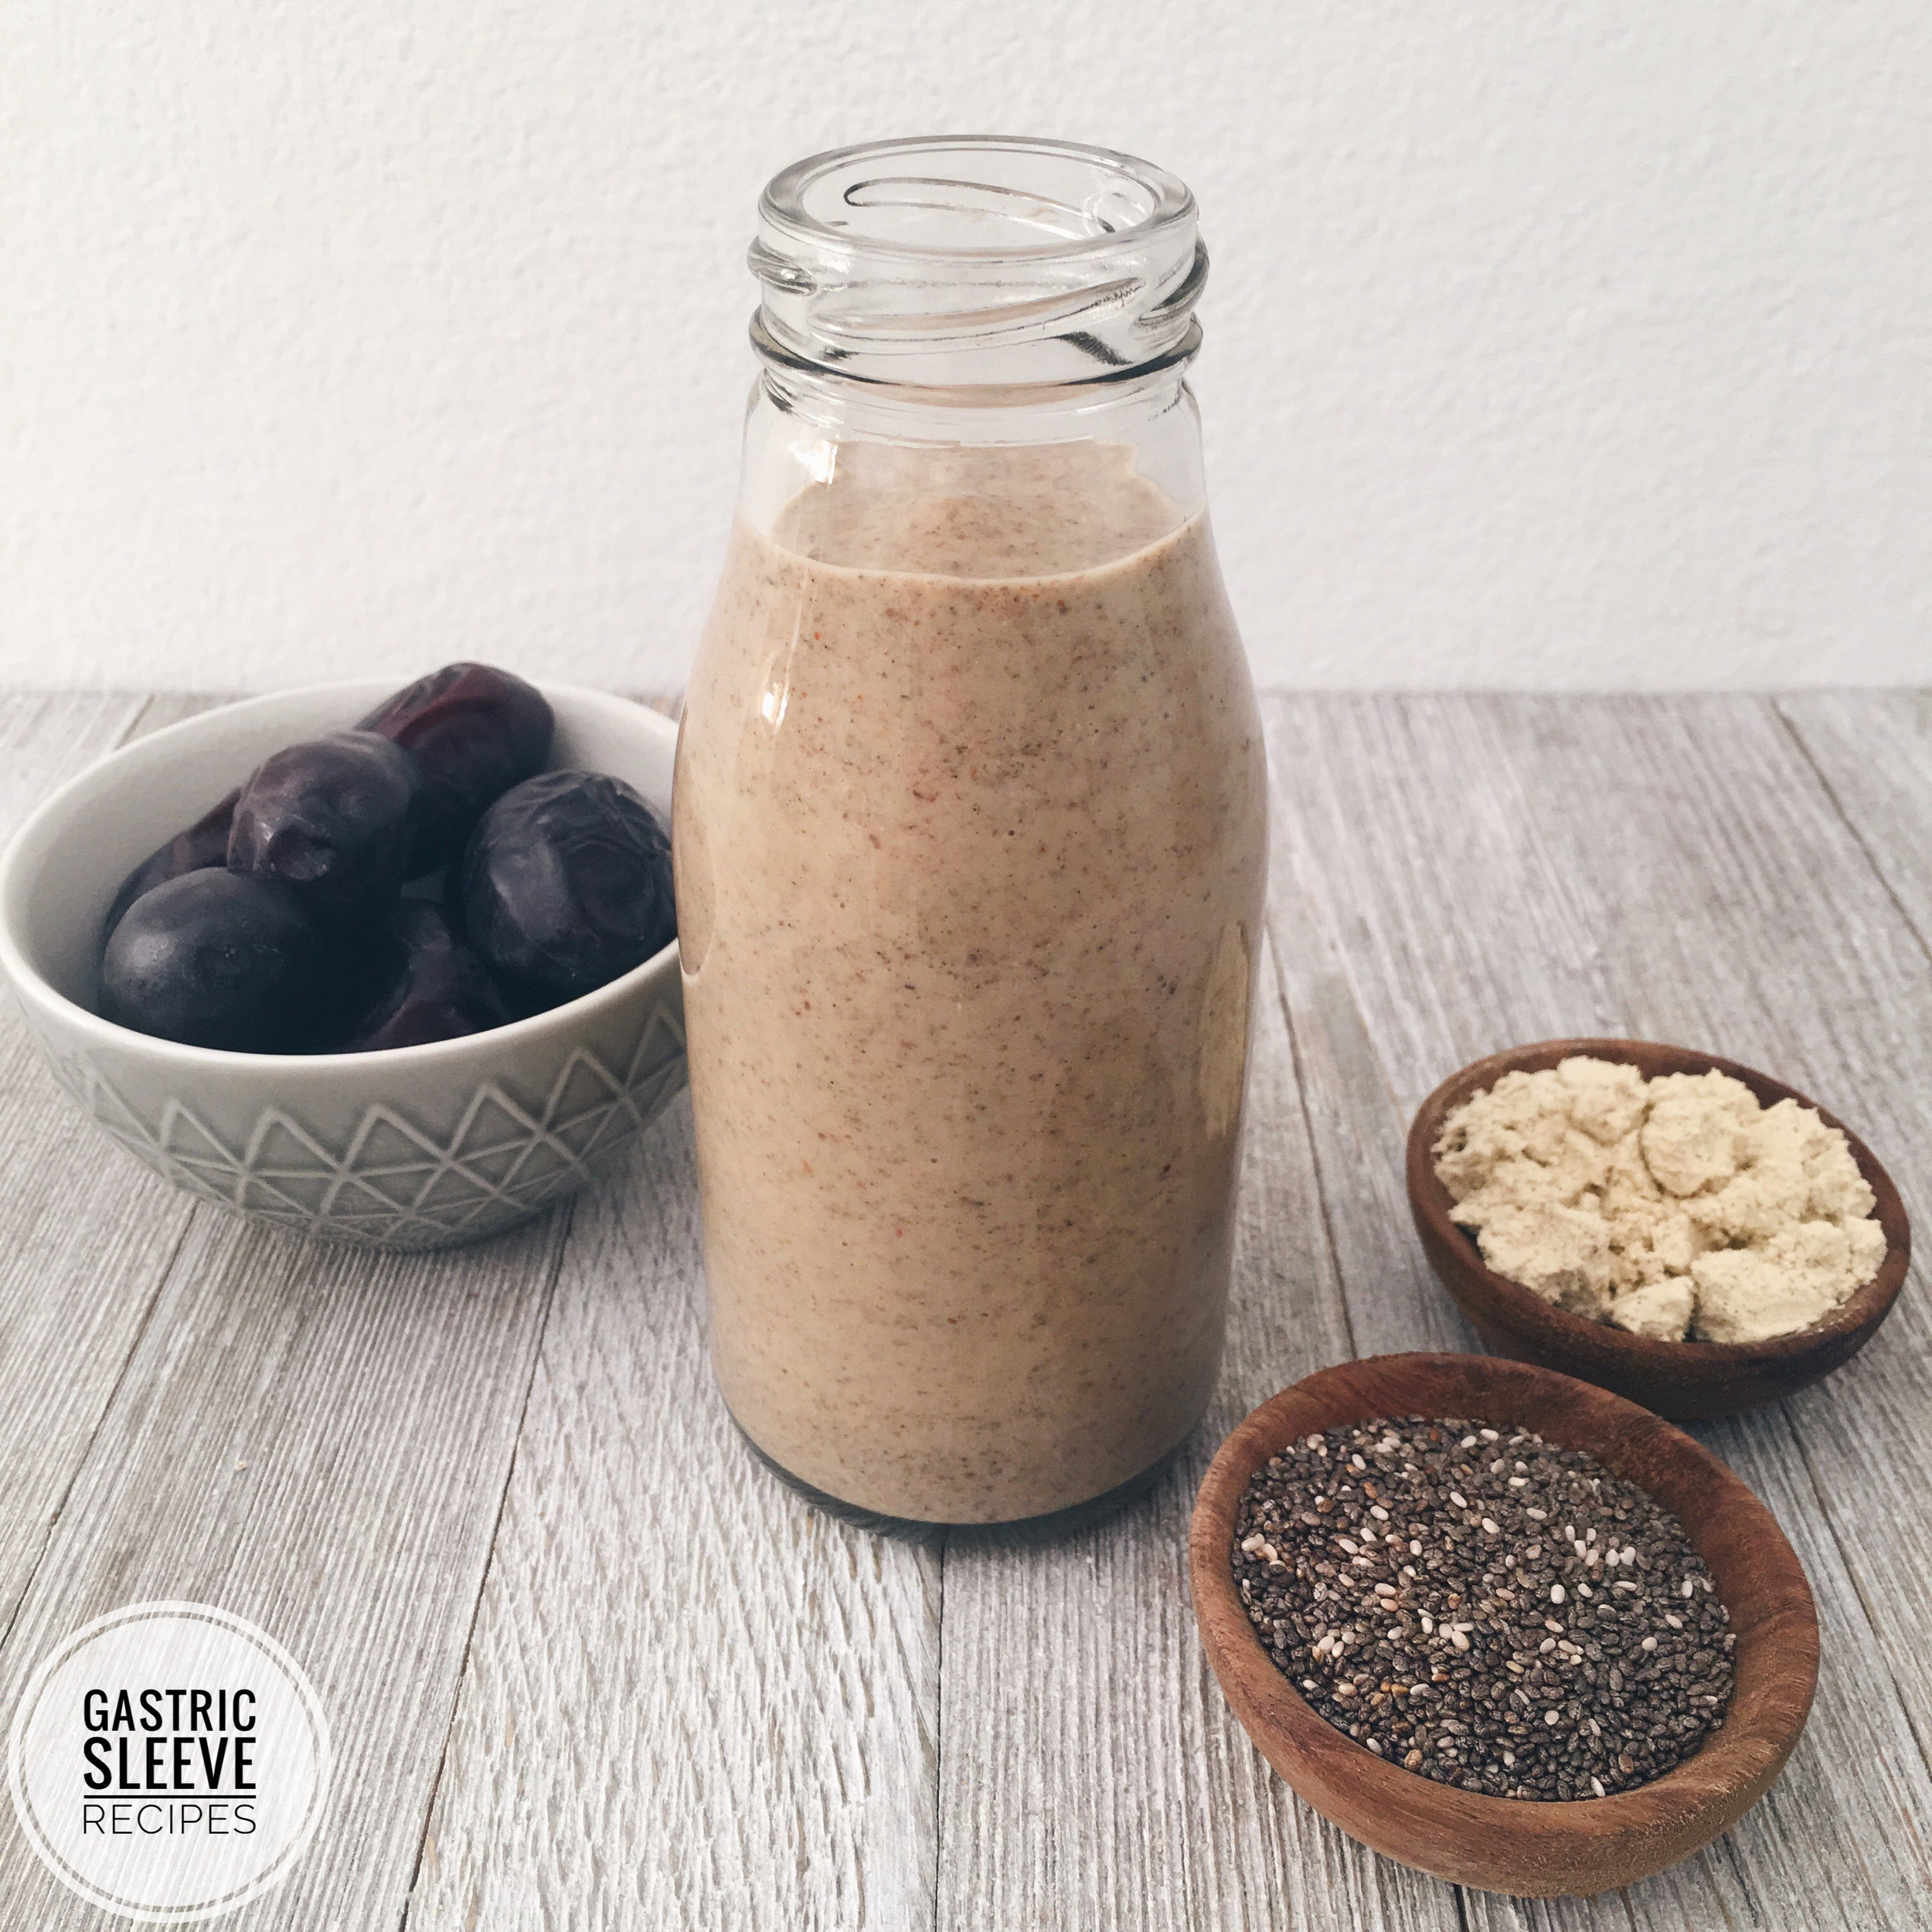 cinnamon-date-and-chia-protein-smoothie-wm.jpg